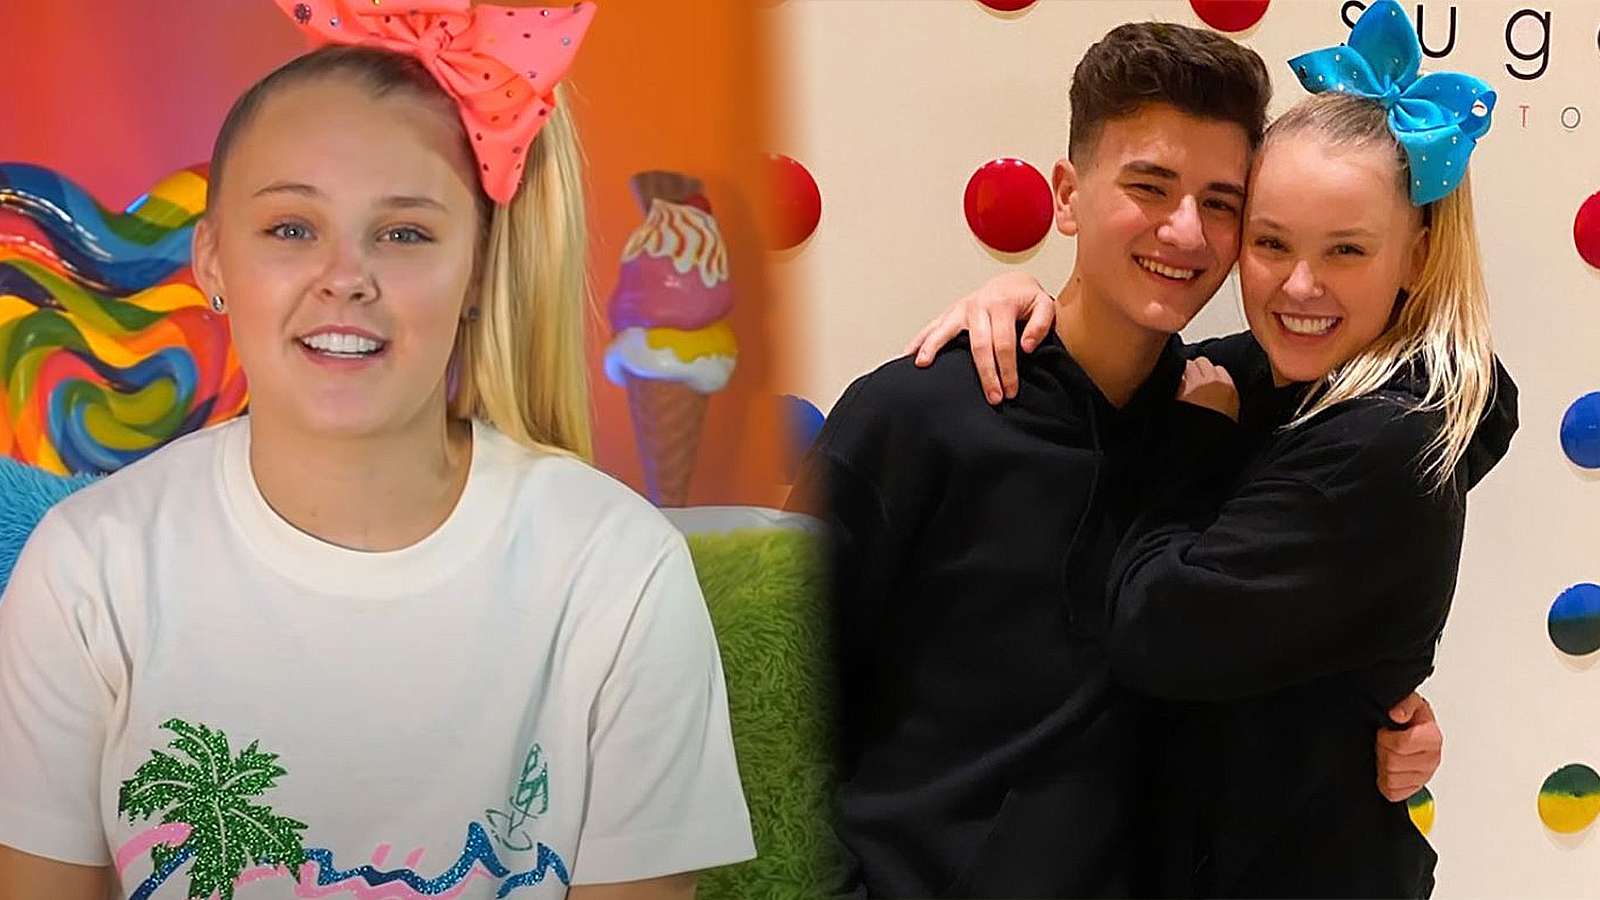 A photo of JoJo Siwa is shown next to another photo of herself and Mark Bontempo having a hug.